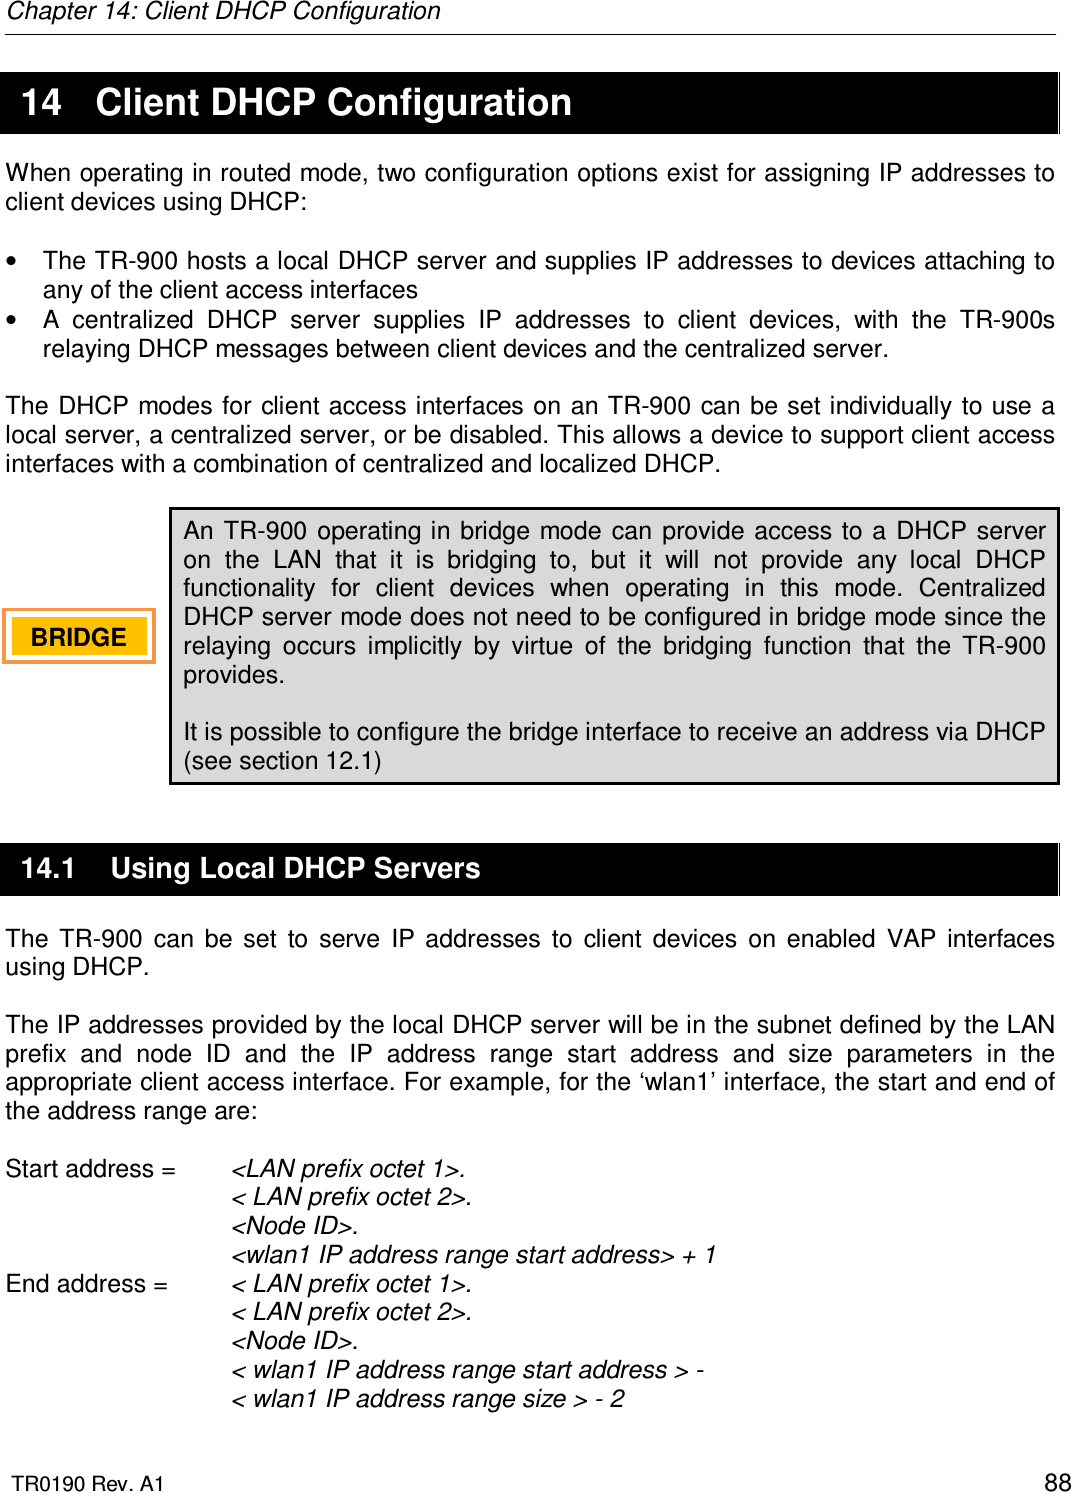 Chapter 14: Client DHCP Configuration  TR0190 Rev. A1    88 14  Client DHCP Configuration When operating in routed mode, two configuration options exist for assigning IP addresses to client devices using DHCP:  •  The TR-900 hosts a local DHCP server and supplies IP addresses to devices attaching to any of the client access interfaces  •  A  centralized  DHCP  server  supplies  IP  addresses  to  client  devices,  with  the  TR-900s relaying DHCP messages between client devices and the centralized server.  The DHCP modes for client access interfaces on an  TR-900 can be set individually to  use a local server, a centralized server, or be disabled. This allows a device to support client access interfaces with a combination of centralized and localized DHCP.  An TR-900  operating in bridge mode can provide access to a  DHCP  server on  the  LAN  that  it  is  bridging  to,  but  it  will  not  provide  any  local  DHCP functionality  for  client  devices  when  operating  in  this  mode.  Centralized DHCP server mode does not need to be configured in bridge mode since the relaying  occurs  implicitly  by  virtue  of  the  bridging  function  that  the  TR-900 provides.  It is possible to configure the bridge interface to receive an address via DHCP (see section 12.1) 14.1  Using Local DHCP Servers The  TR-900  can  be  set  to  serve  IP  addresses  to  client  devices  on  enabled  VAP  interfaces using DHCP.   The IP addresses provided by the local DHCP server will be in the subnet defined by the LAN prefix  and  node  ID  and  the  IP  address  range  start  address  and  size  parameters  in  the appropriate client access interface. For example, for the ‘wlan1’ interface, the start and end of the address range are:  Start address =   &lt;LAN prefix octet 1&gt;. &lt; LAN prefix octet 2&gt;. &lt;Node ID&gt;. &lt;wlan1 IP address range start address&gt; + 1 End address =   &lt; LAN prefix octet 1&gt;. &lt; LAN prefix octet 2&gt;. &lt;Node ID&gt;. &lt; wlan1 IP address range start address &gt; -  &lt; wlan1 IP address range size &gt; - 2 BRIDGE   